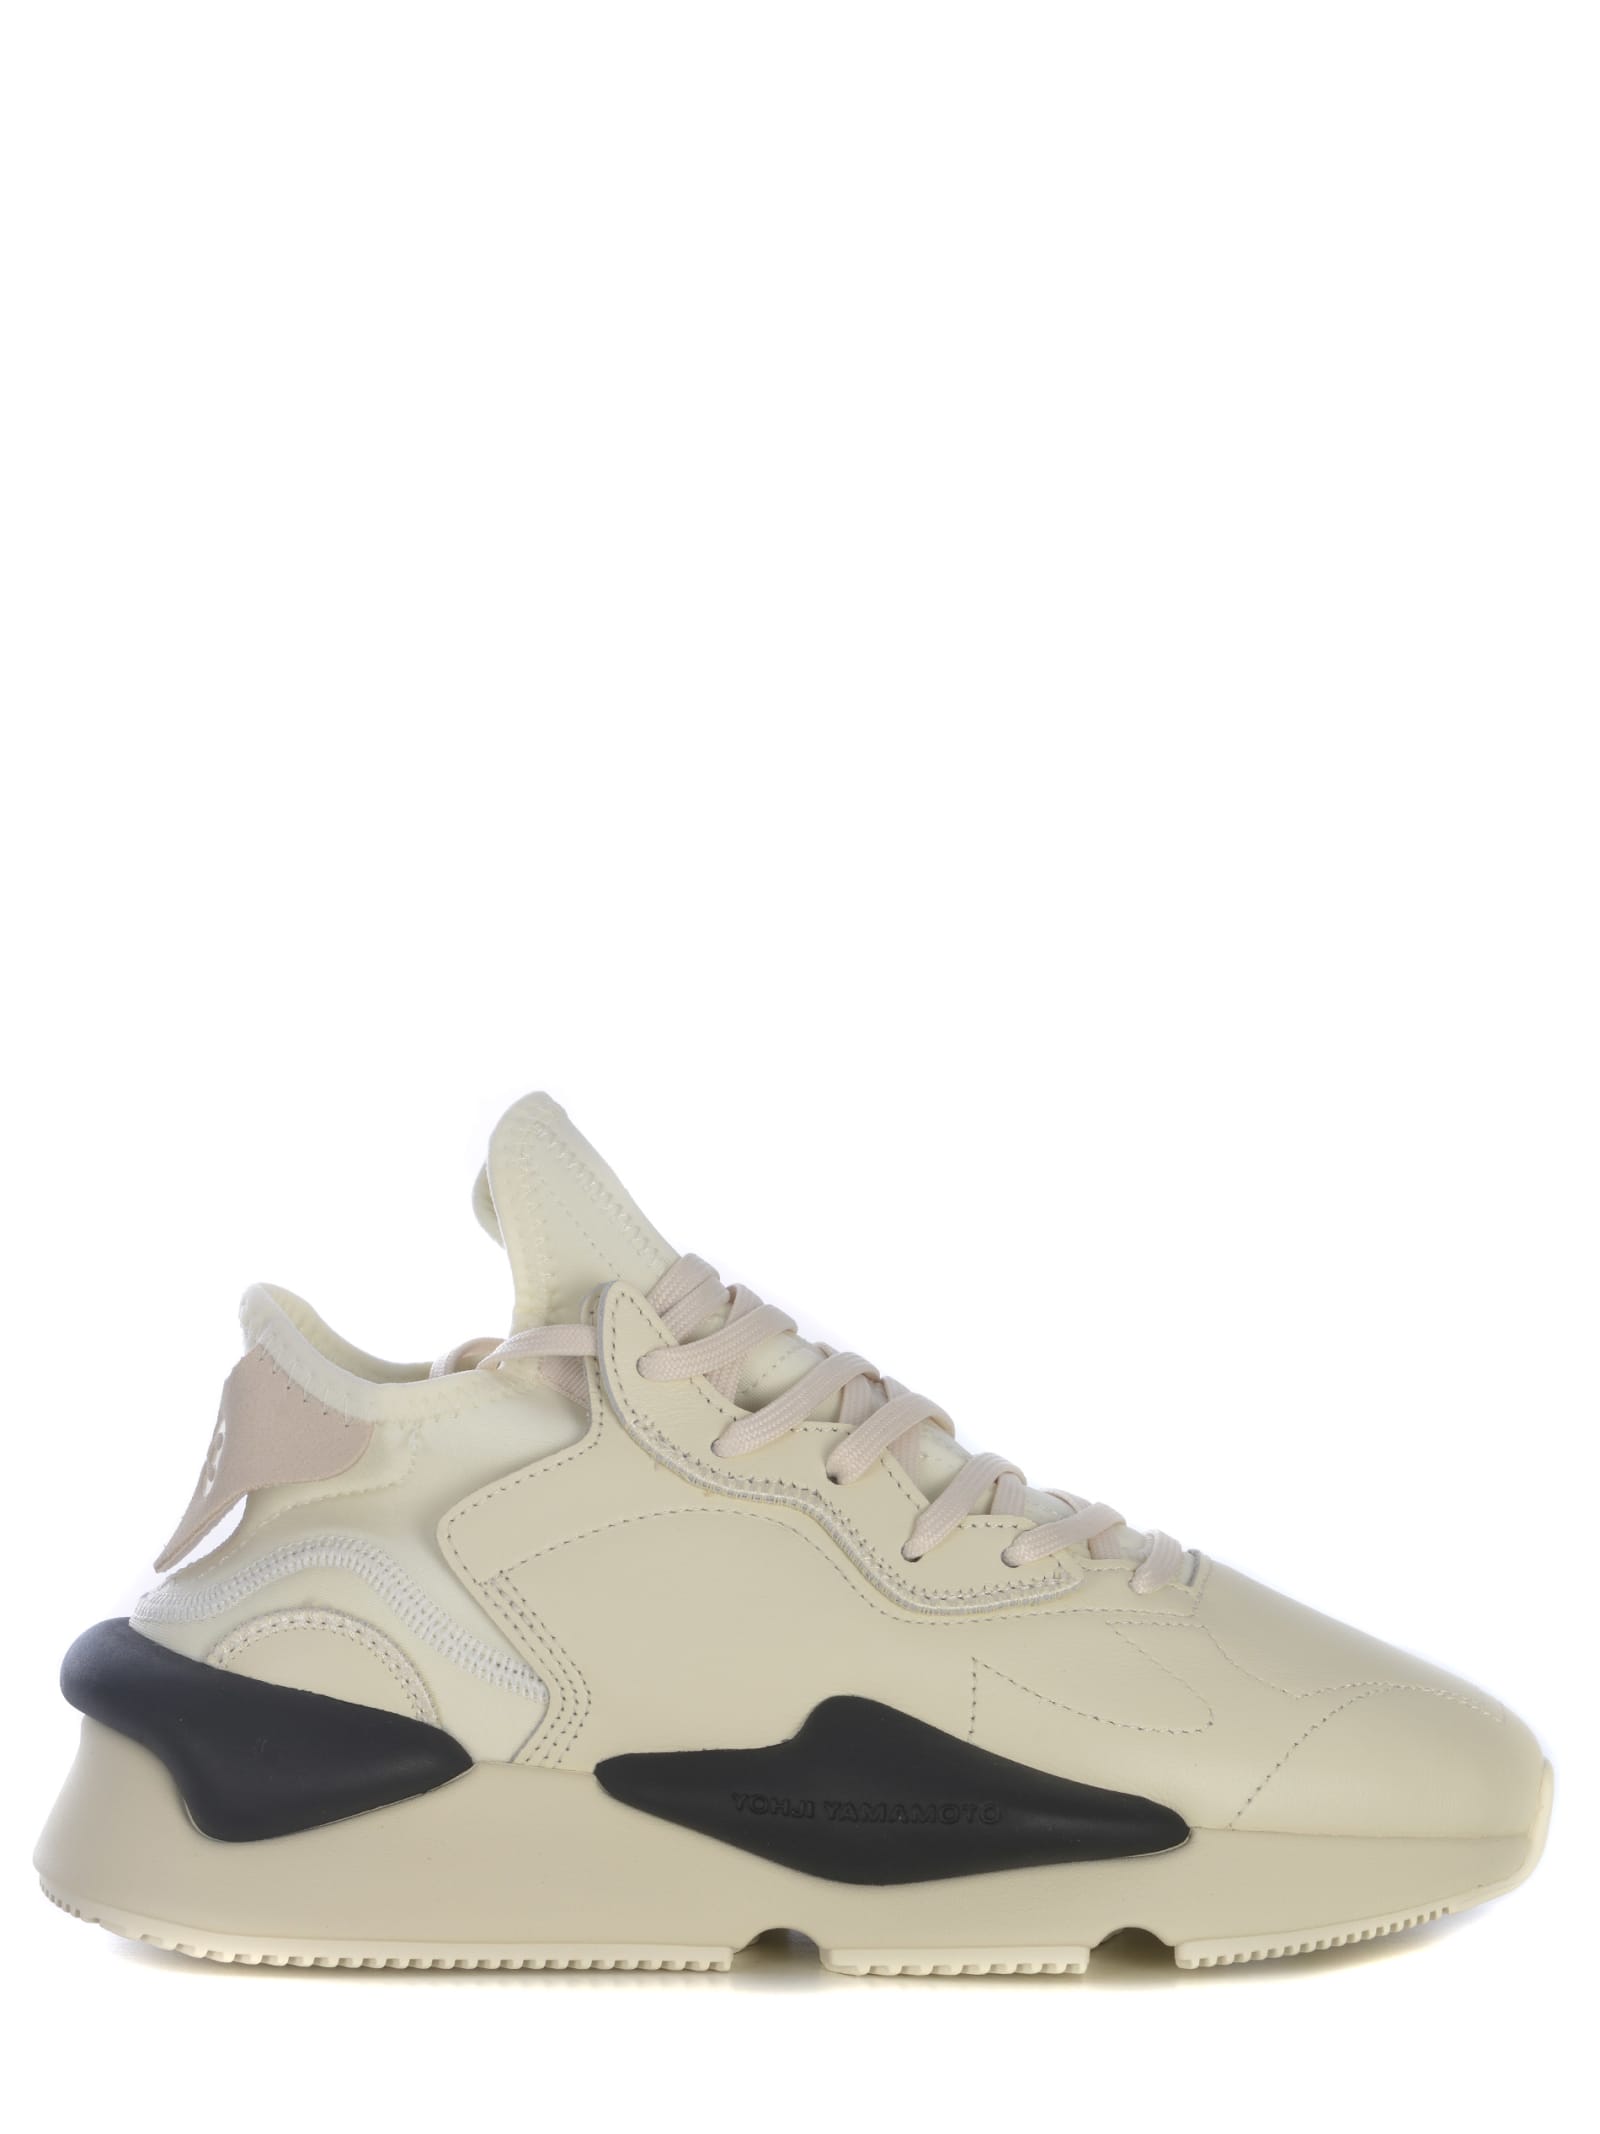 Shop Y-3 Sneakers  Kaiwa Made With Leather Upper In Crema